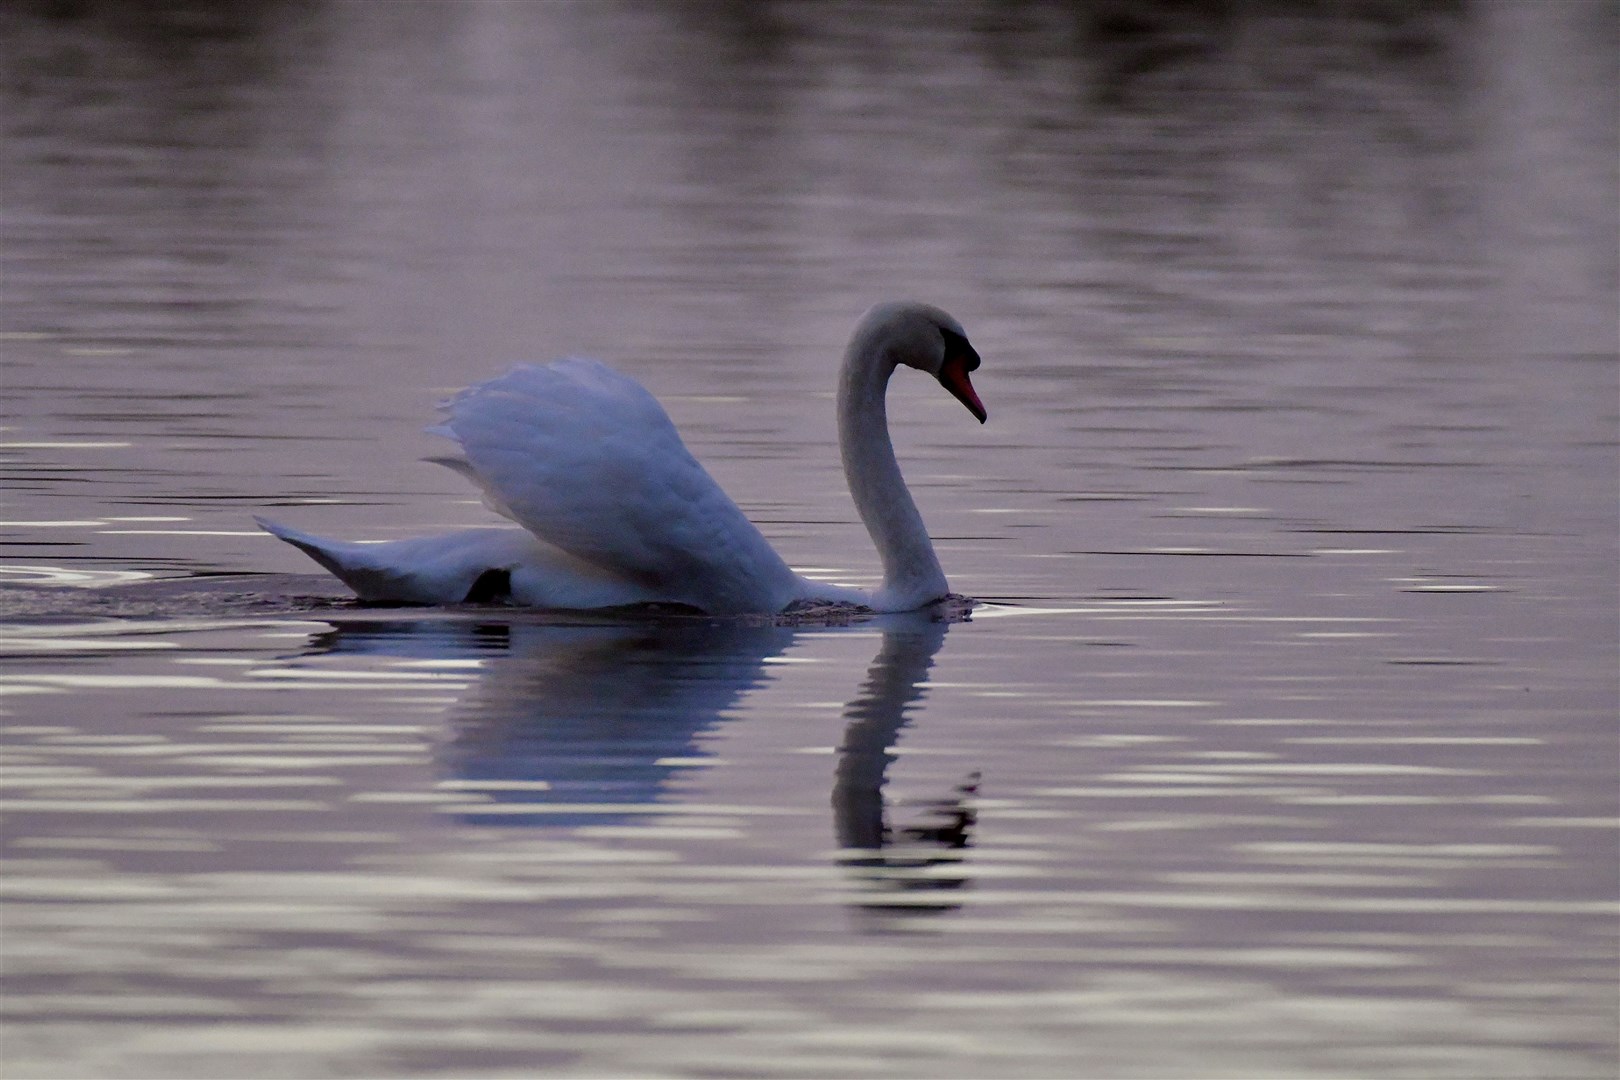 Hazel Thomson, from Elgin, took this photo of a swan on Spynie Loch.